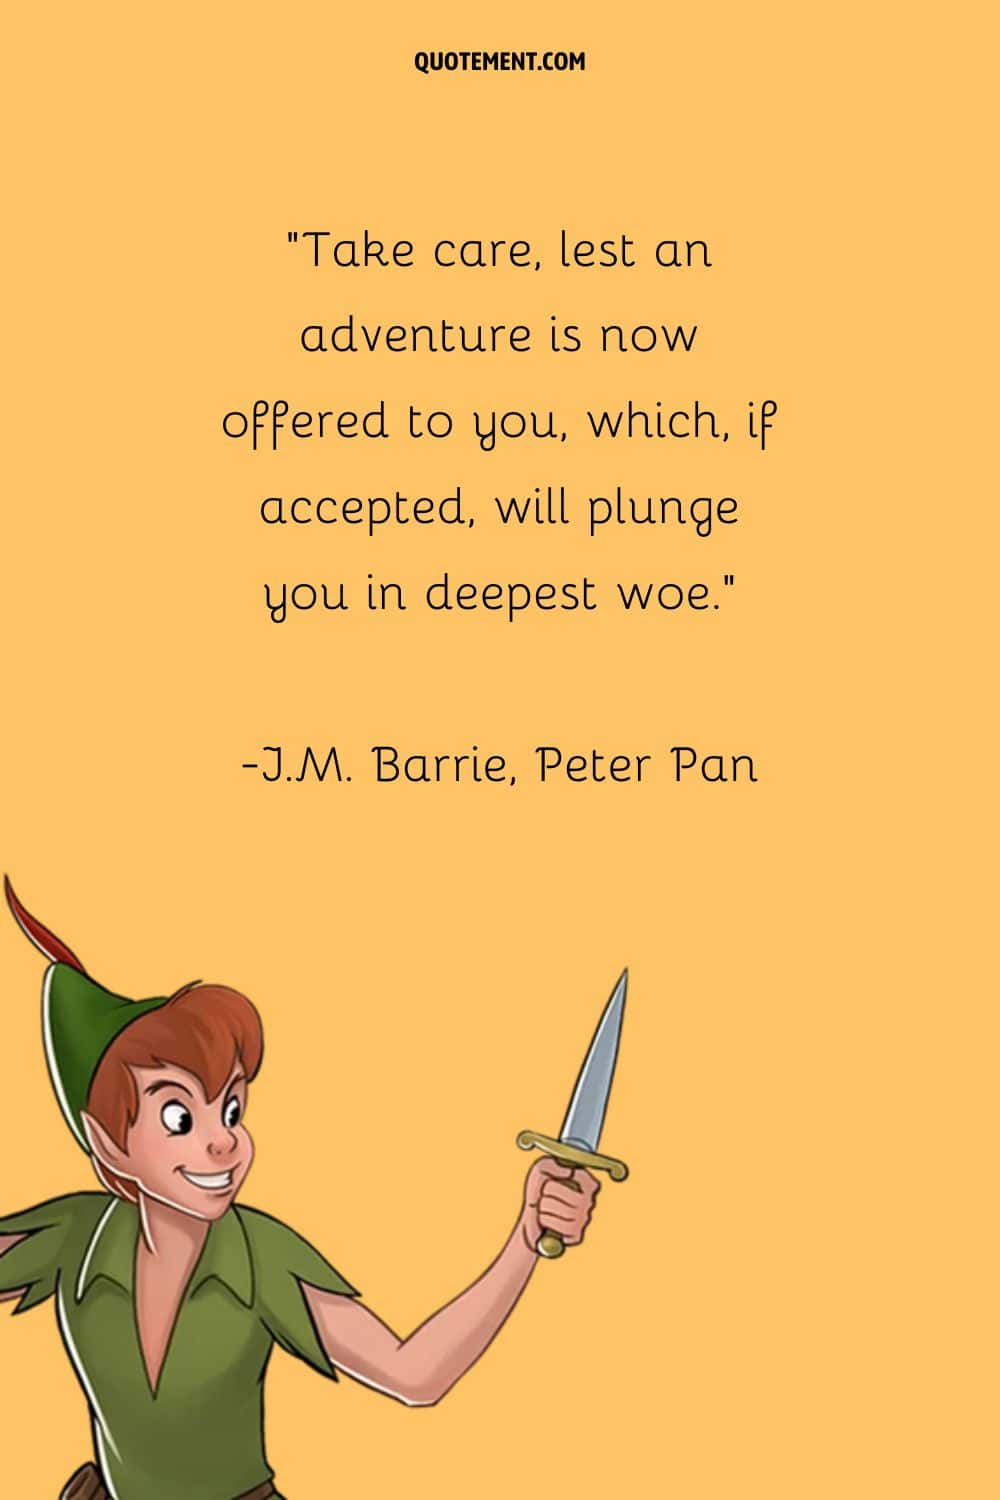 “Take care, lest an adventure is now offered to you, which, if accepted, will plunge you in deepest woe.” ― J.M. Barrie, Peter Pan